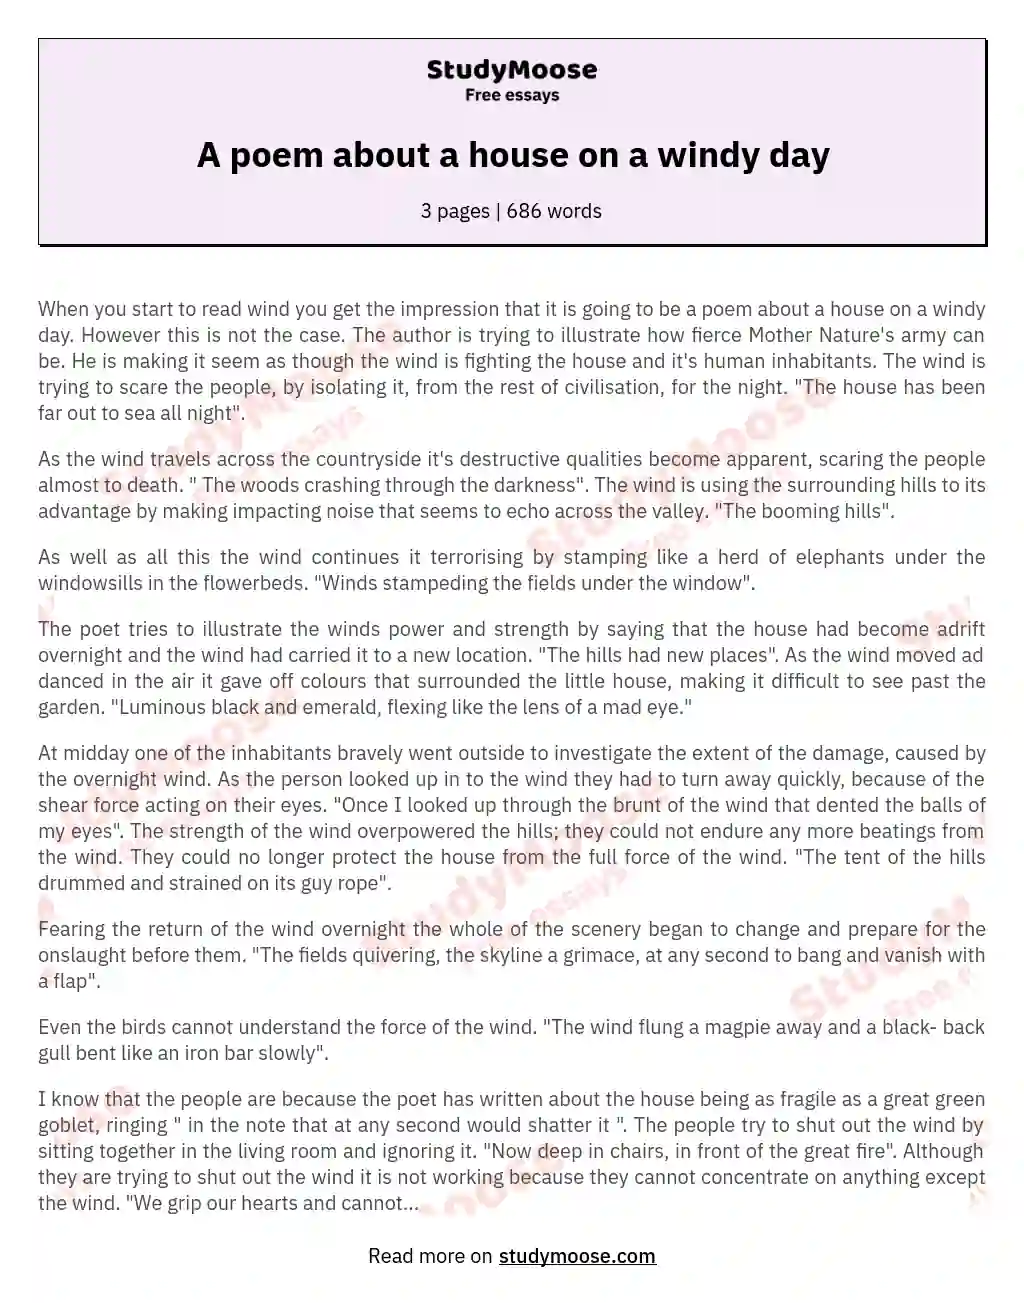 A poem about a house on a windy day essay